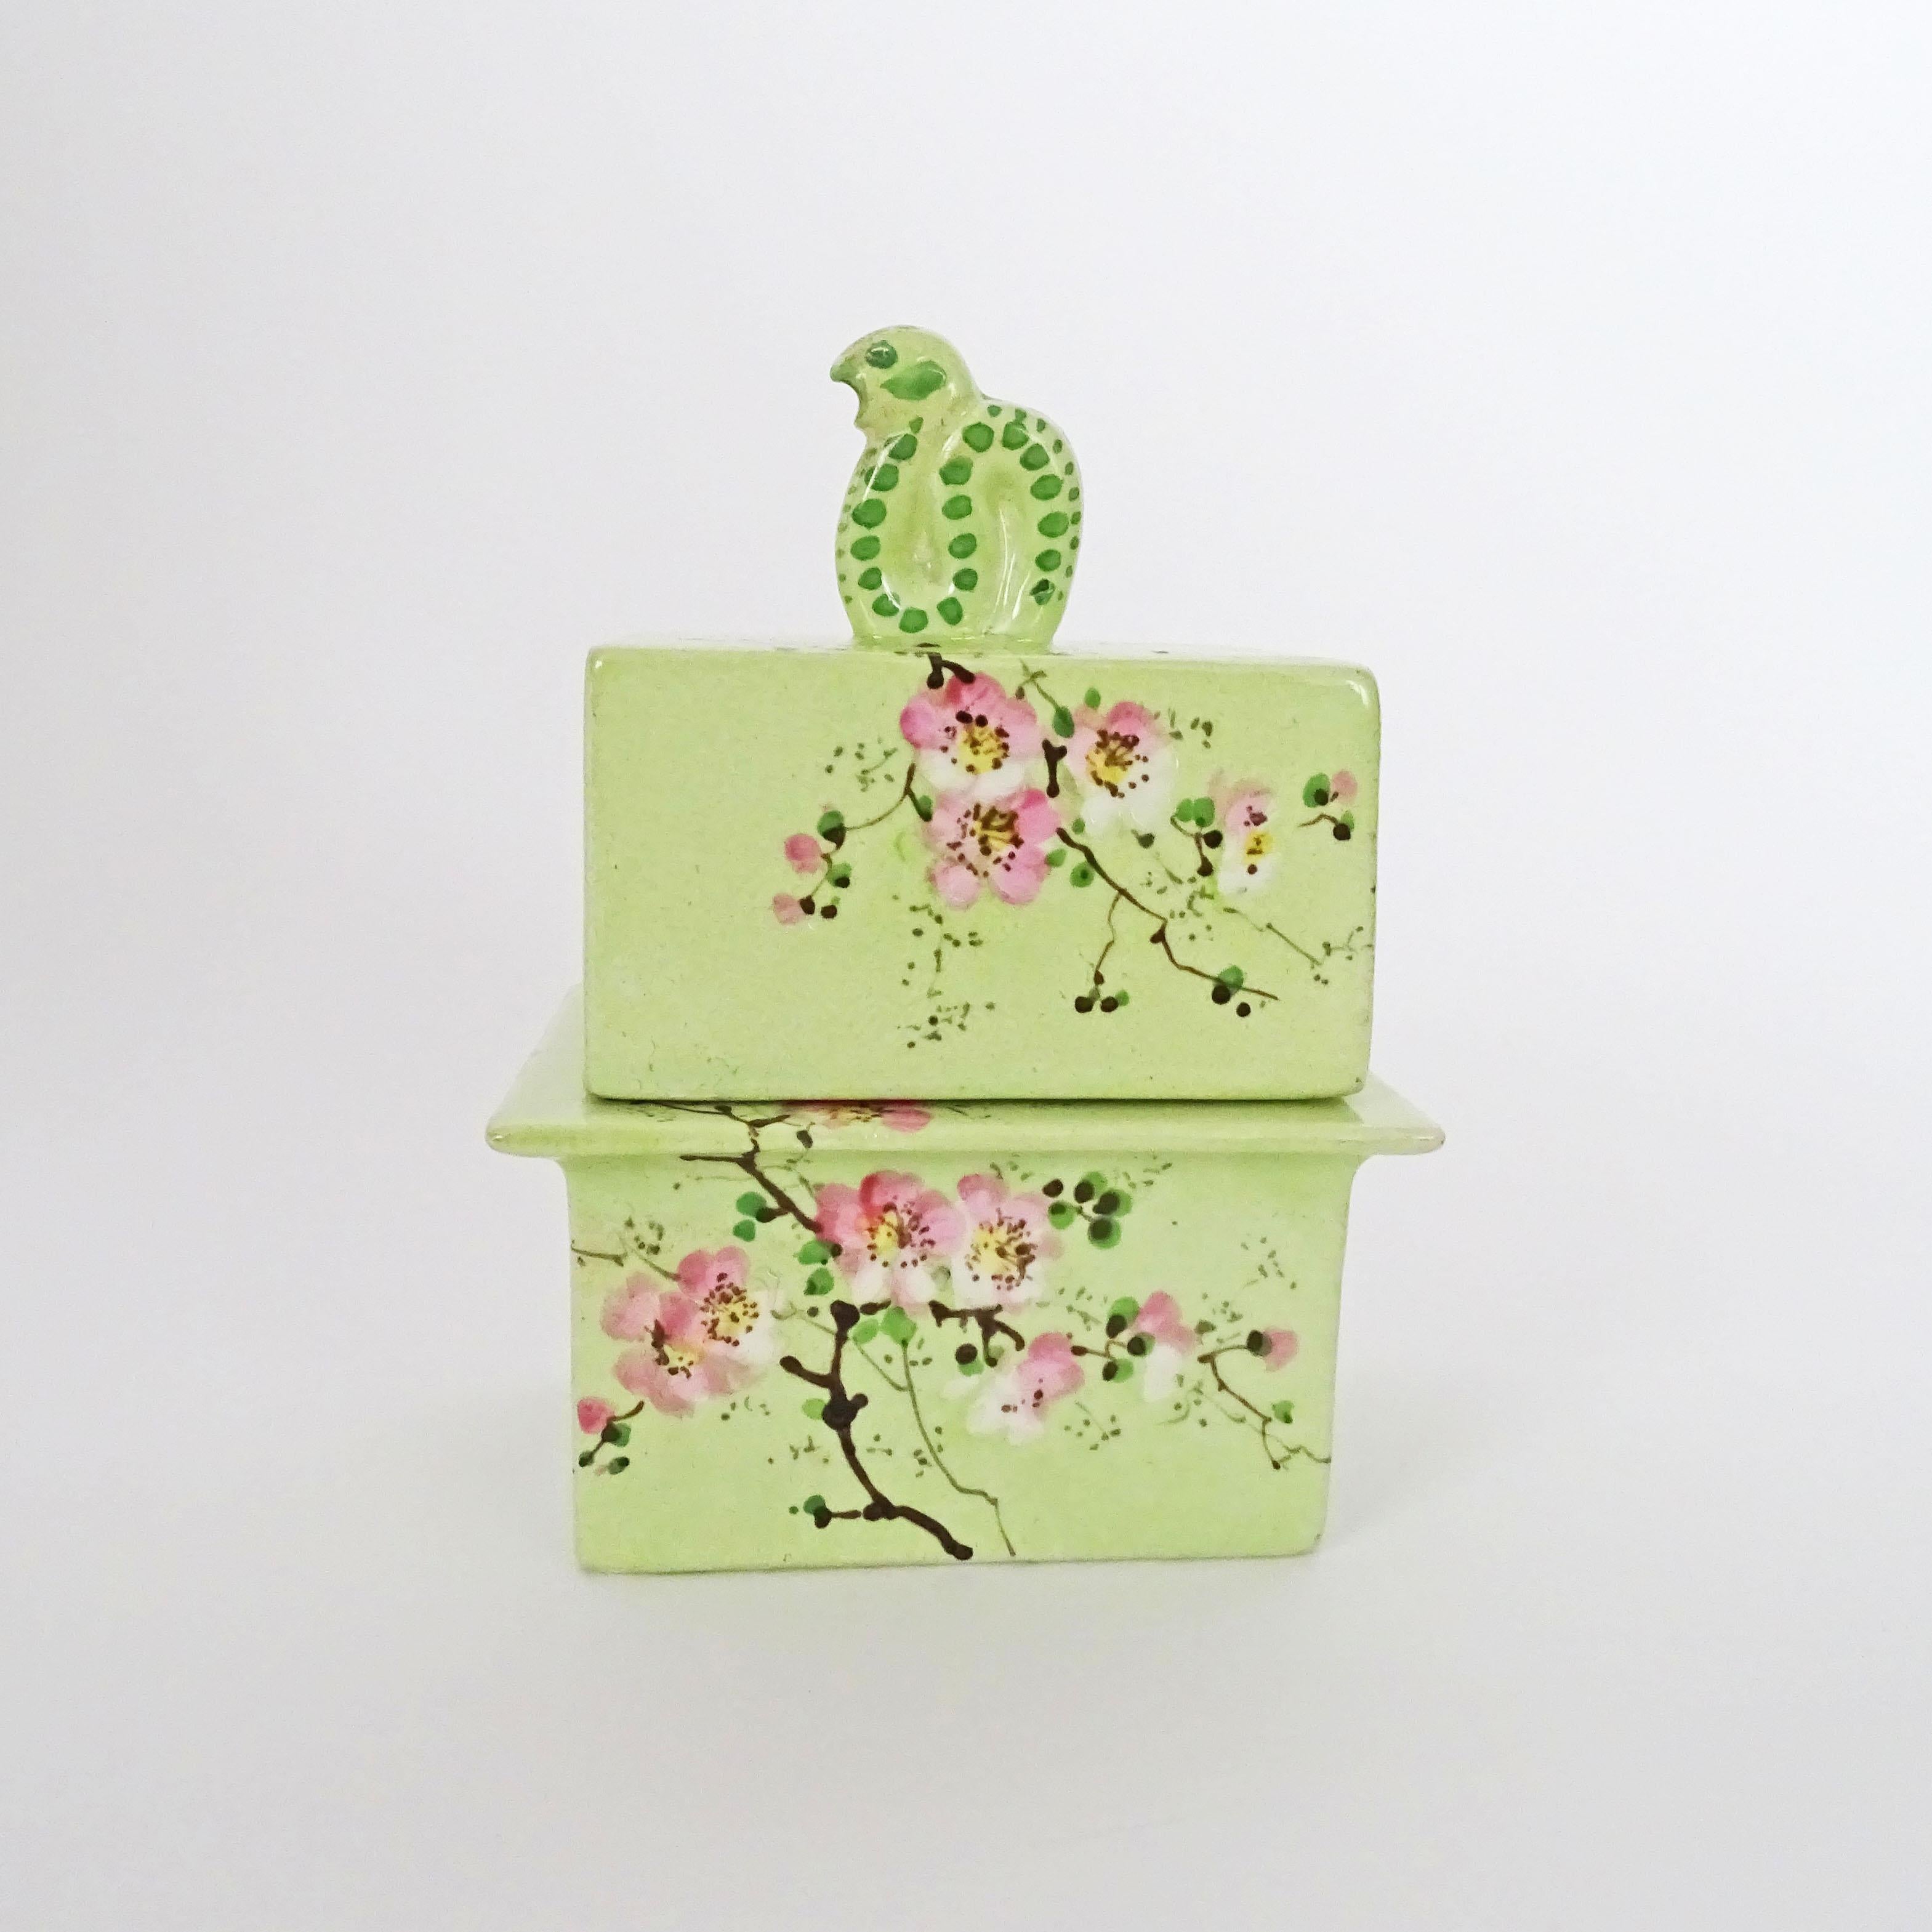 Gio Ponti Ceramic Cigarette Box for Richard Ginori Italy 1930s
The box was later ( 1940s ) repainted in light green with flower blossoms.
